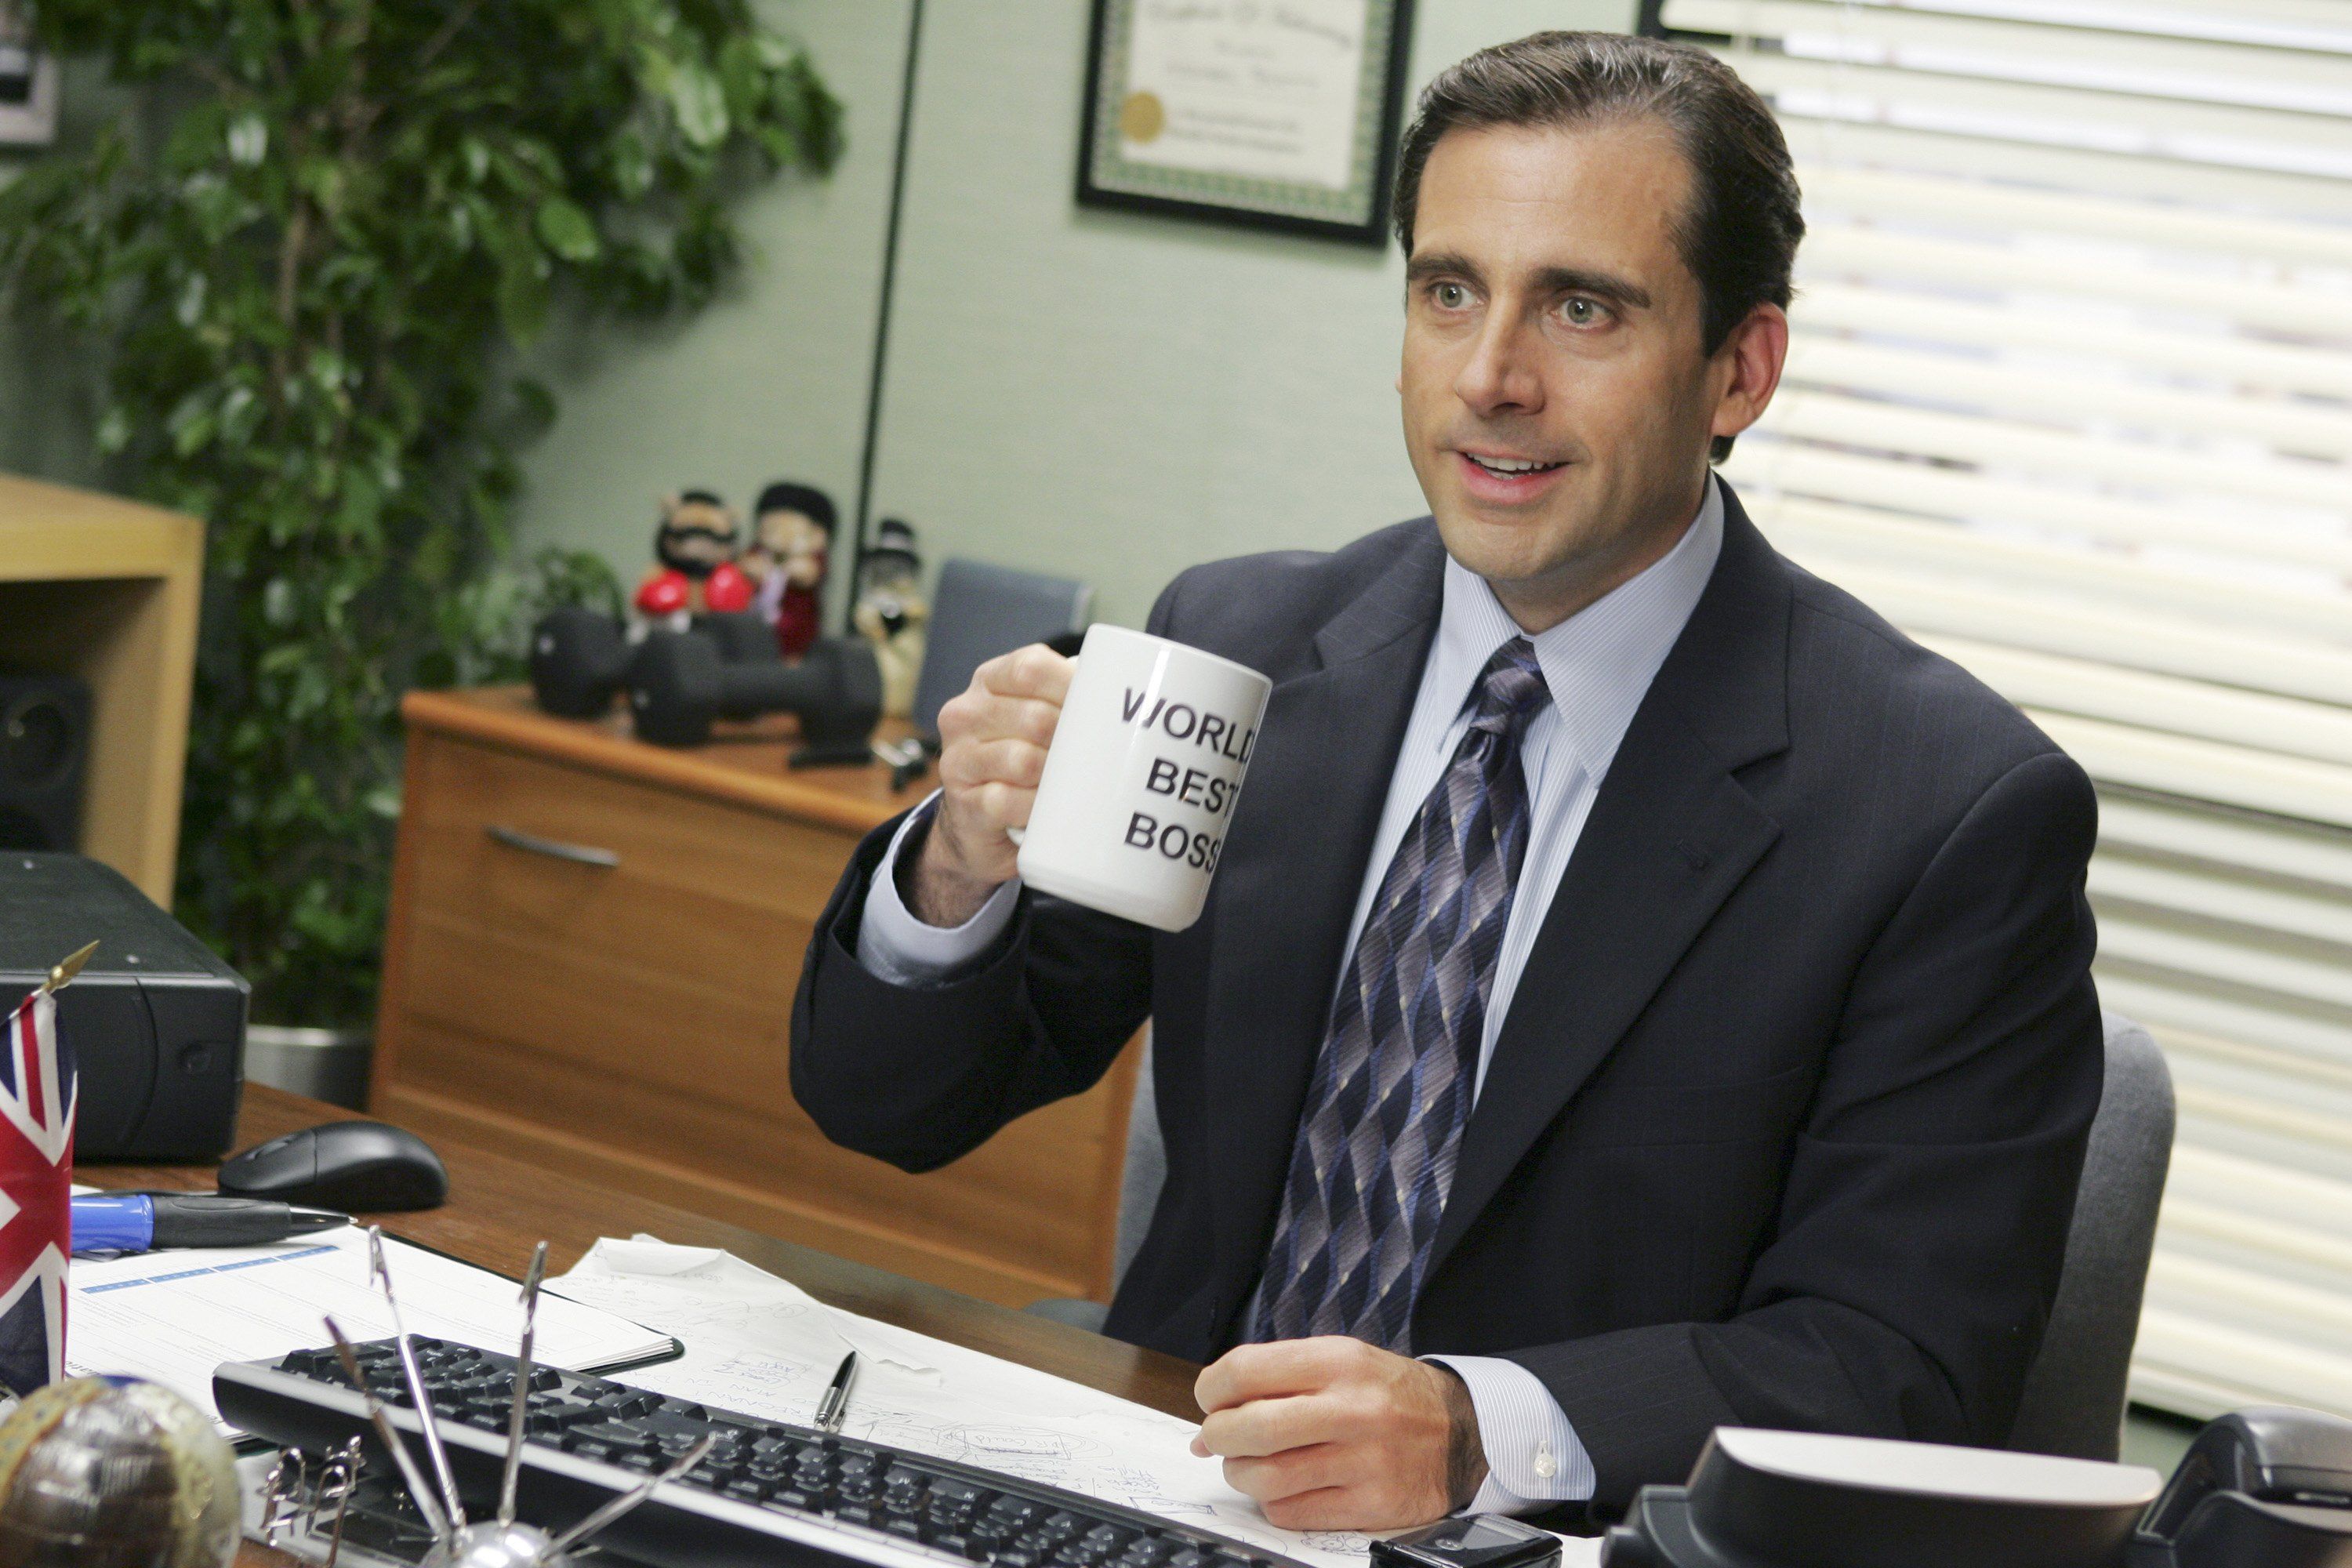 Why Did Michael Scott Leave The Office in Season 7?